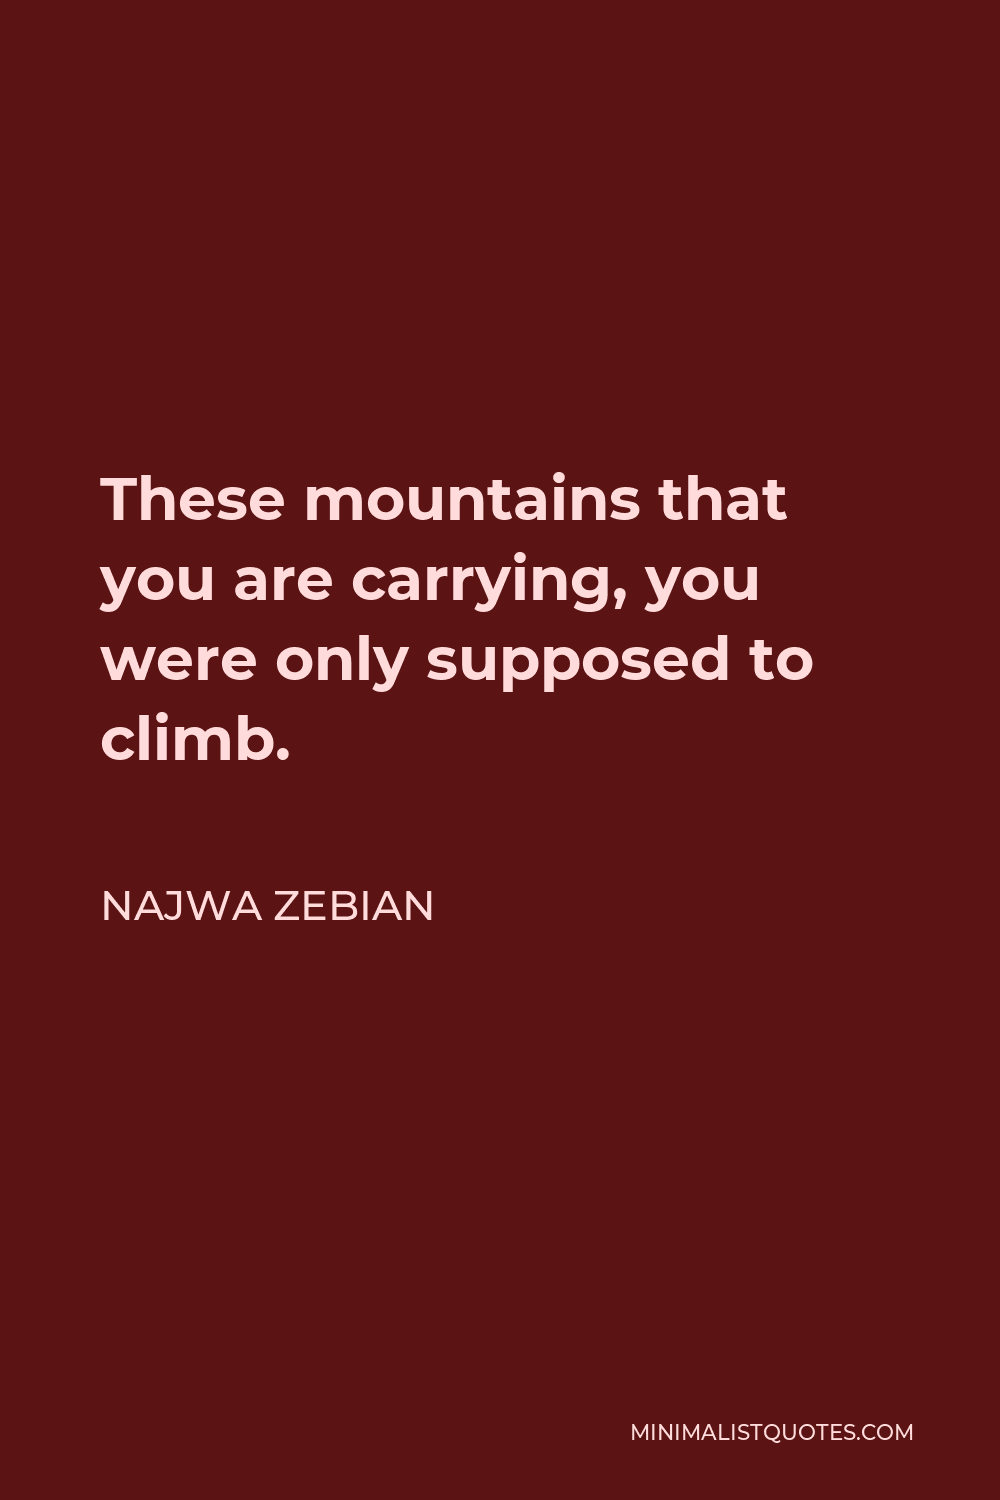 Najwa Zebian Quote - These mountains that you are carrying, you were only supposed to climb.